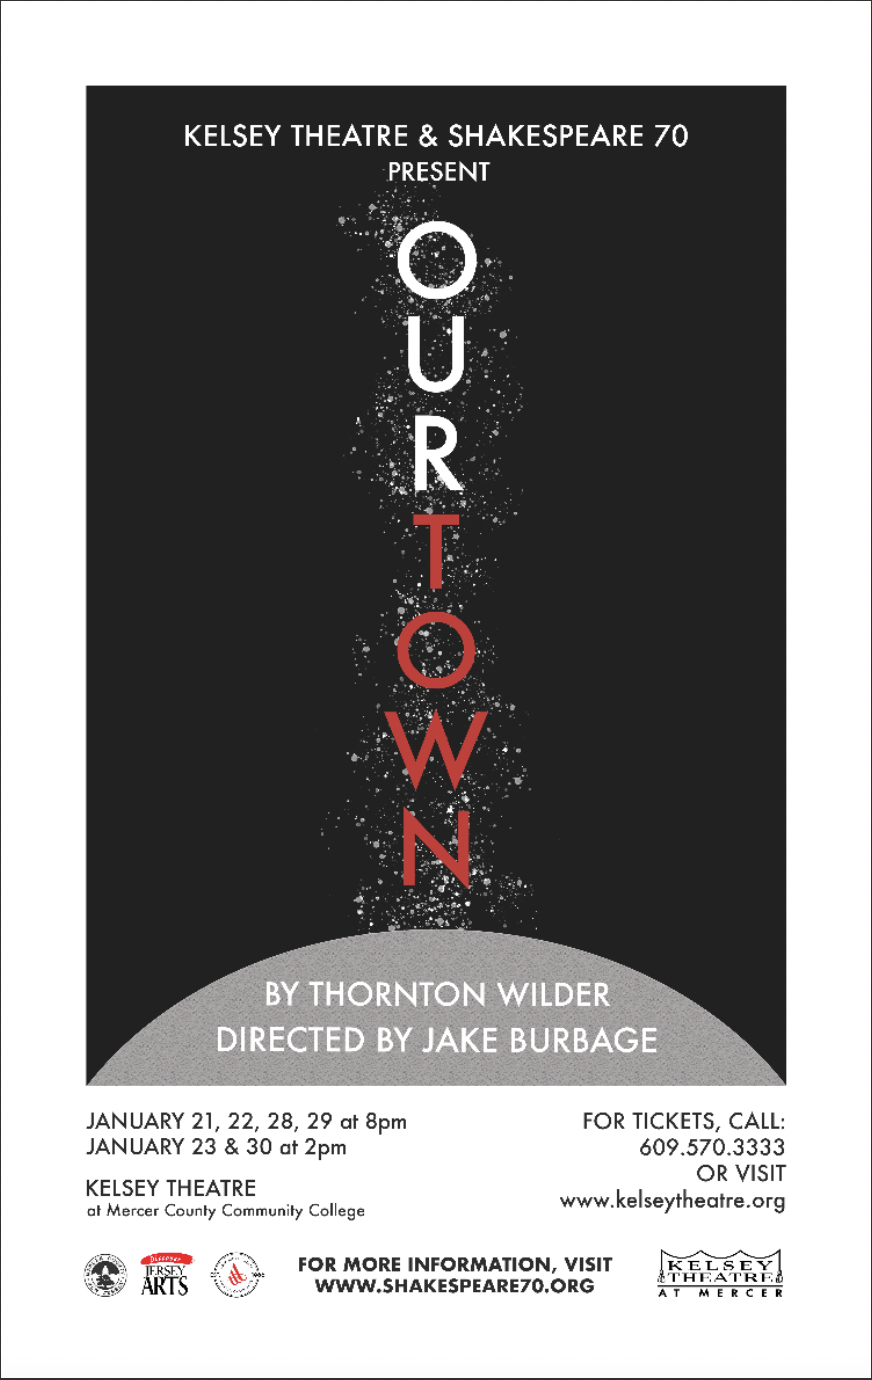 Our Town Poster